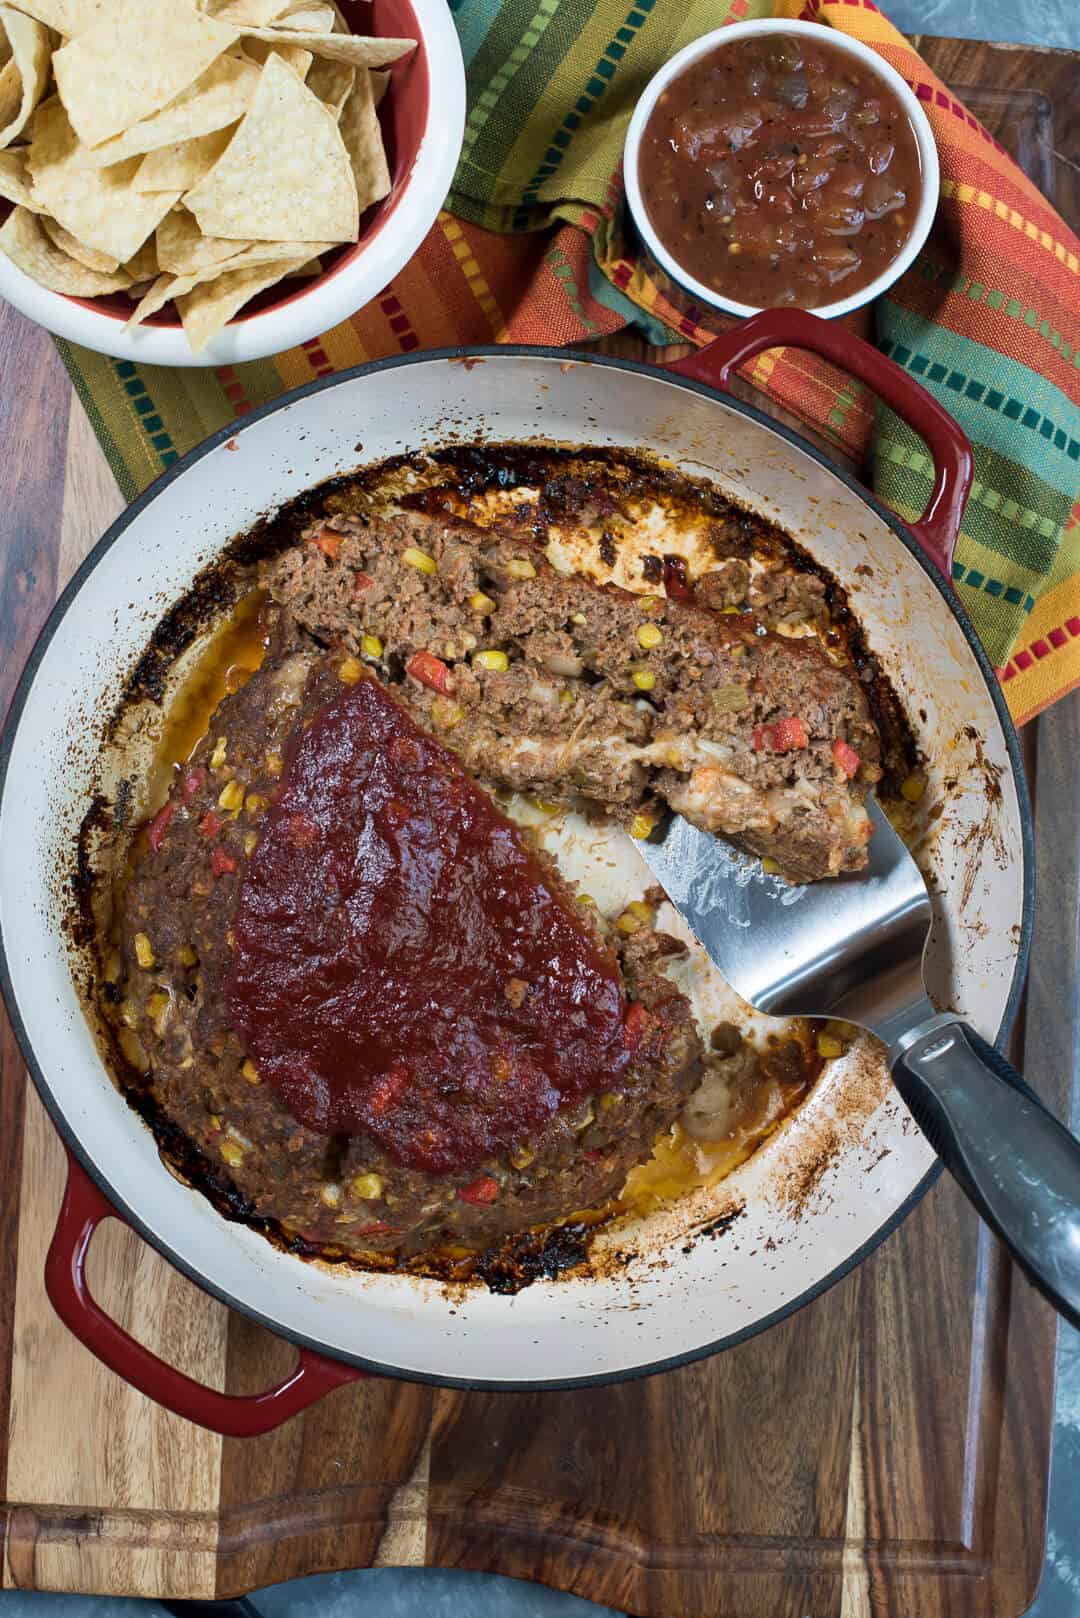 Big, bold, and flavorful, this Tex-Mex Cheese Stuffed Meatloaf with Smoky Chili Glaze will satisfy the heartiest of appetites!